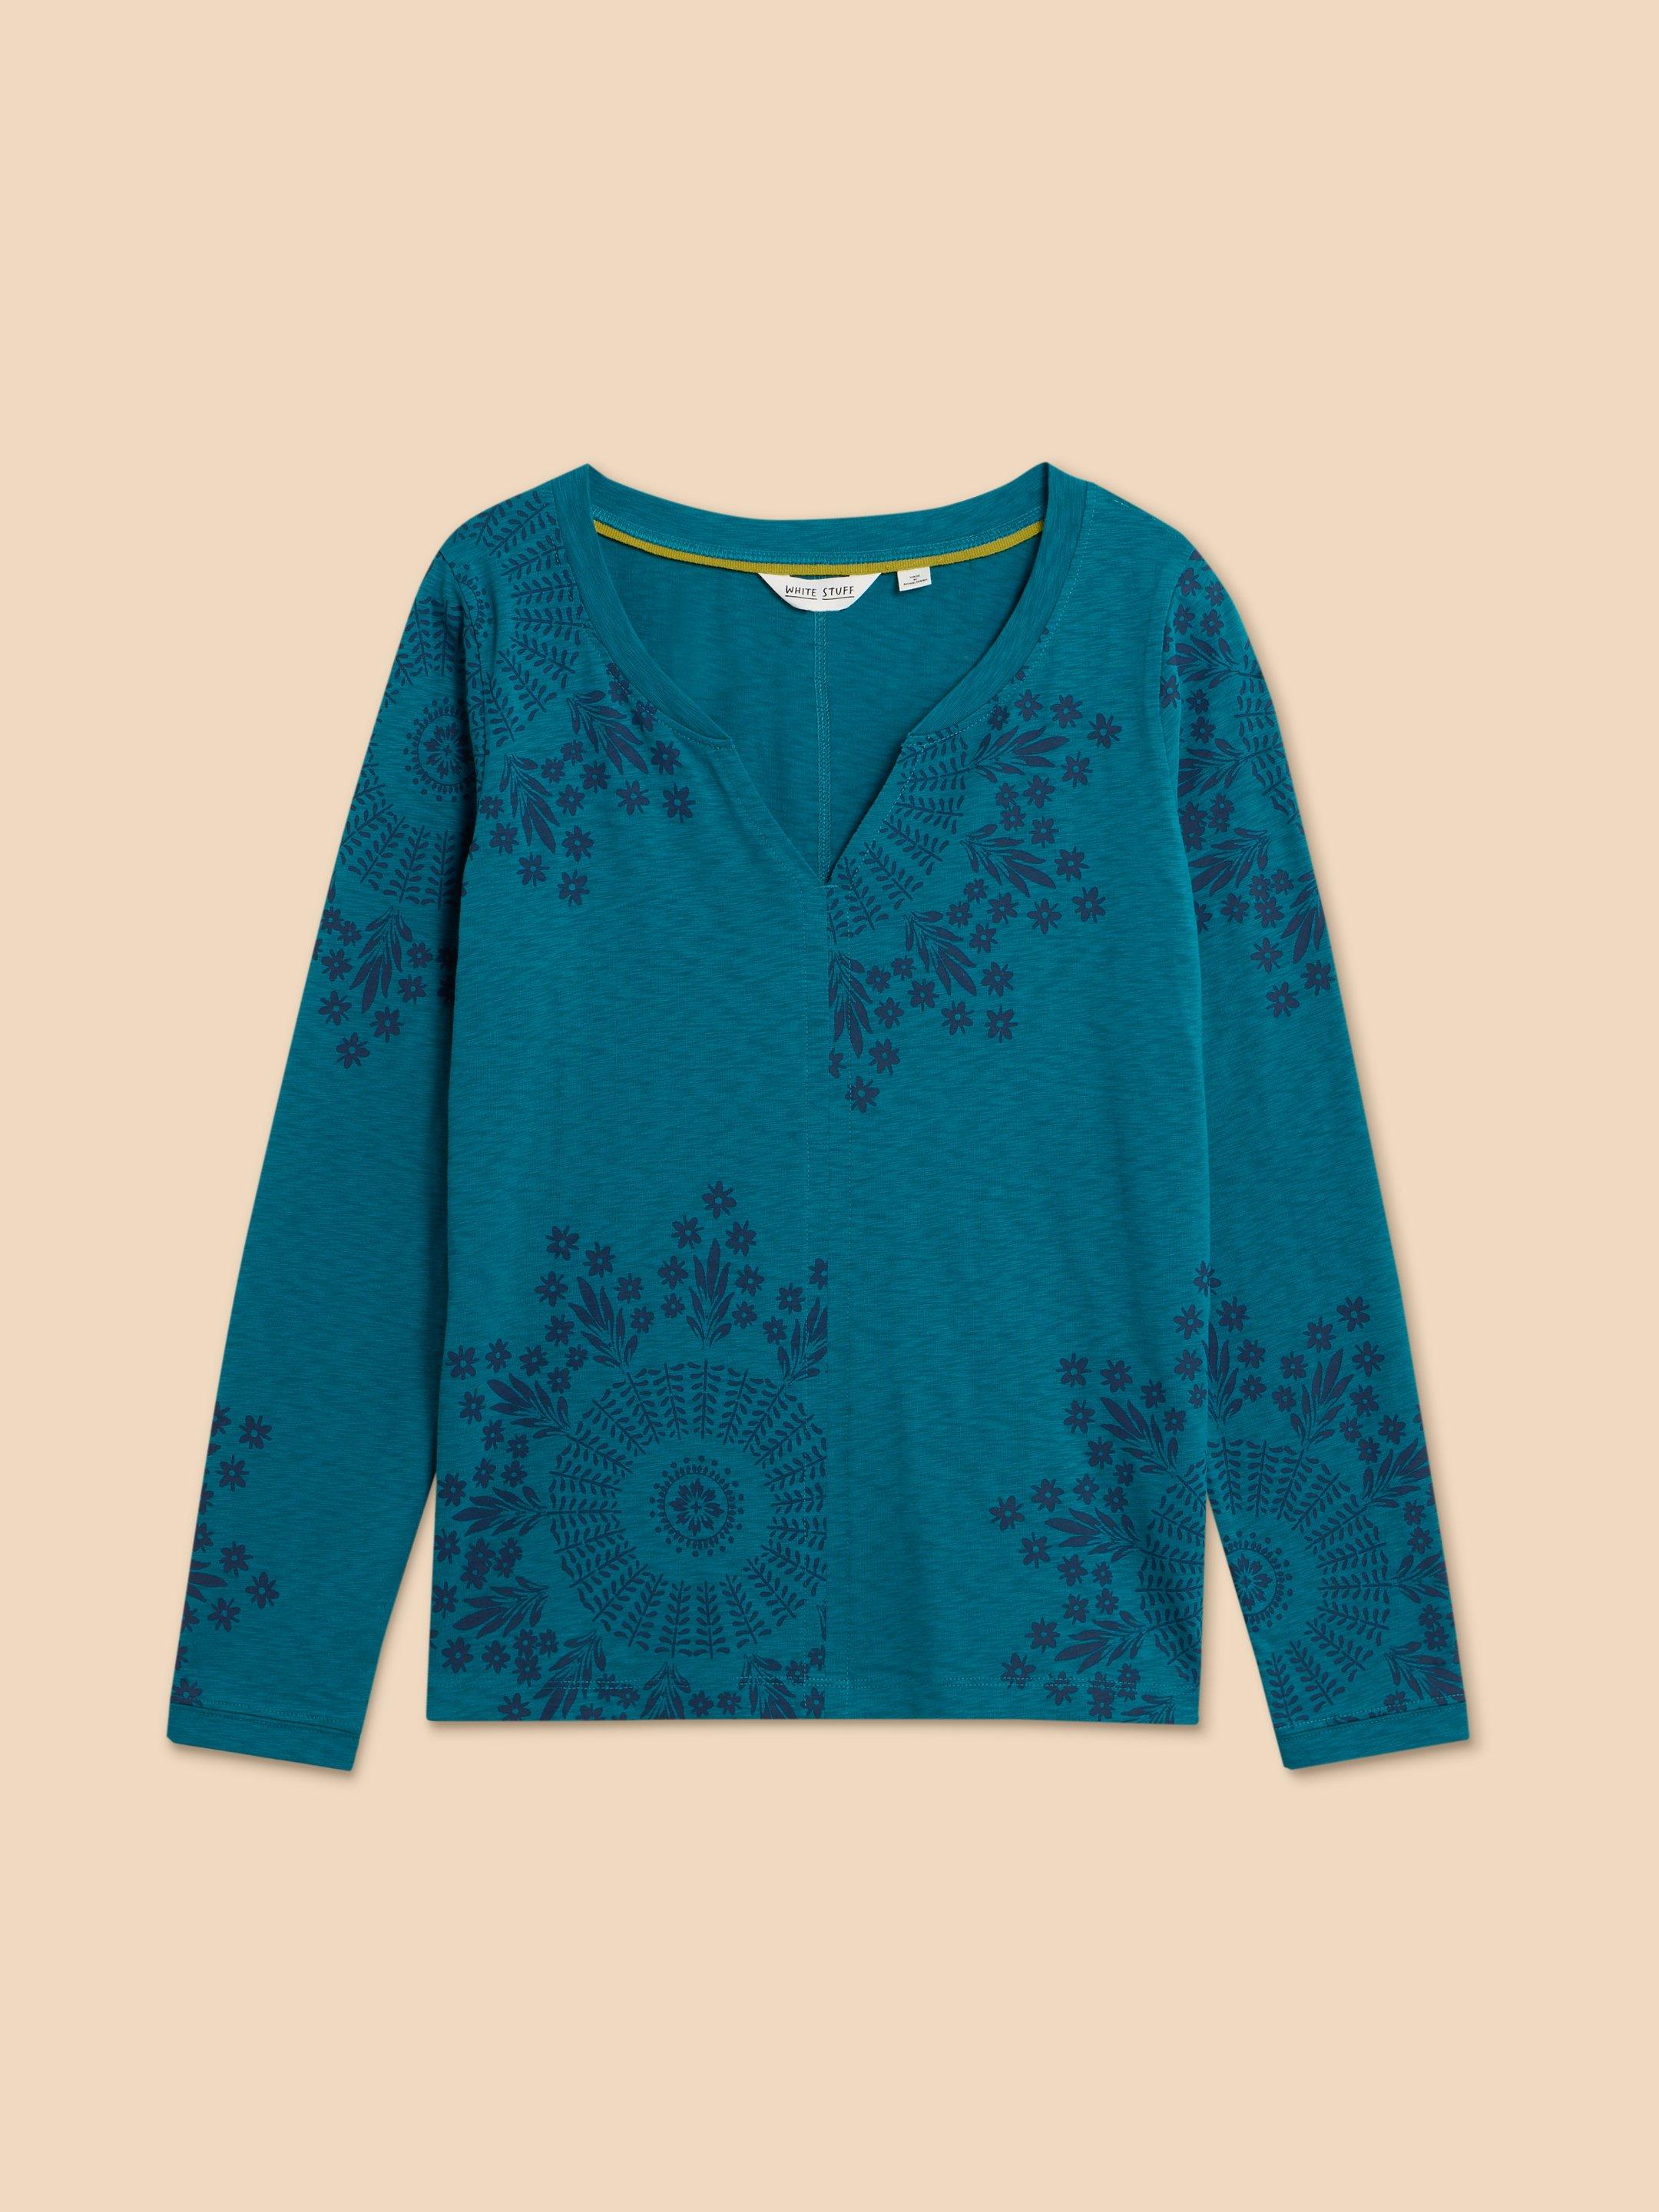 NELLY LS PRINTED TEE in TEAL PR - FLAT FRONT